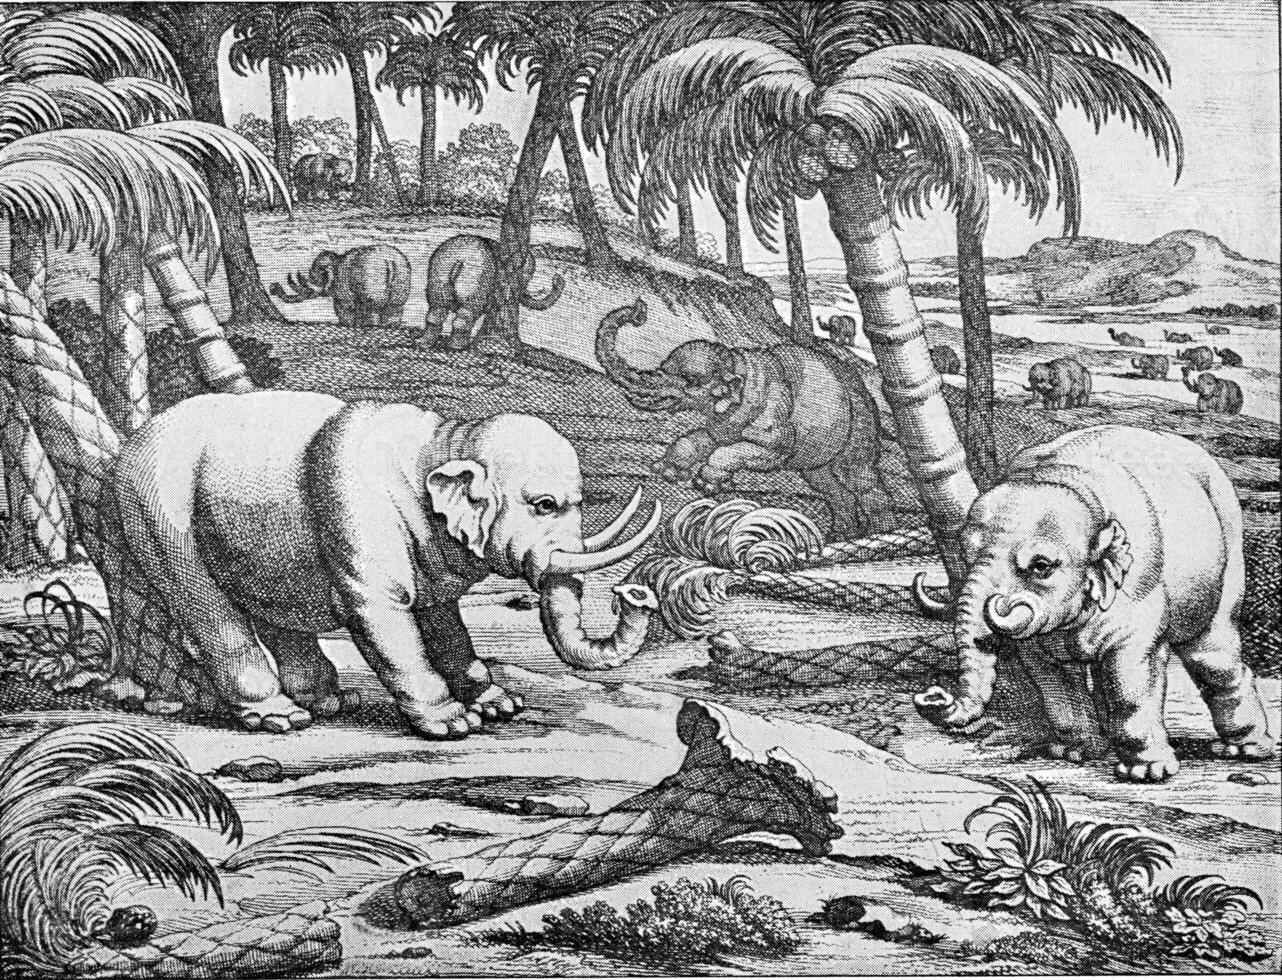 Destruction of a forest of palm trees in the island of Ceylon by elephants in search of food, vintage engraving. photo